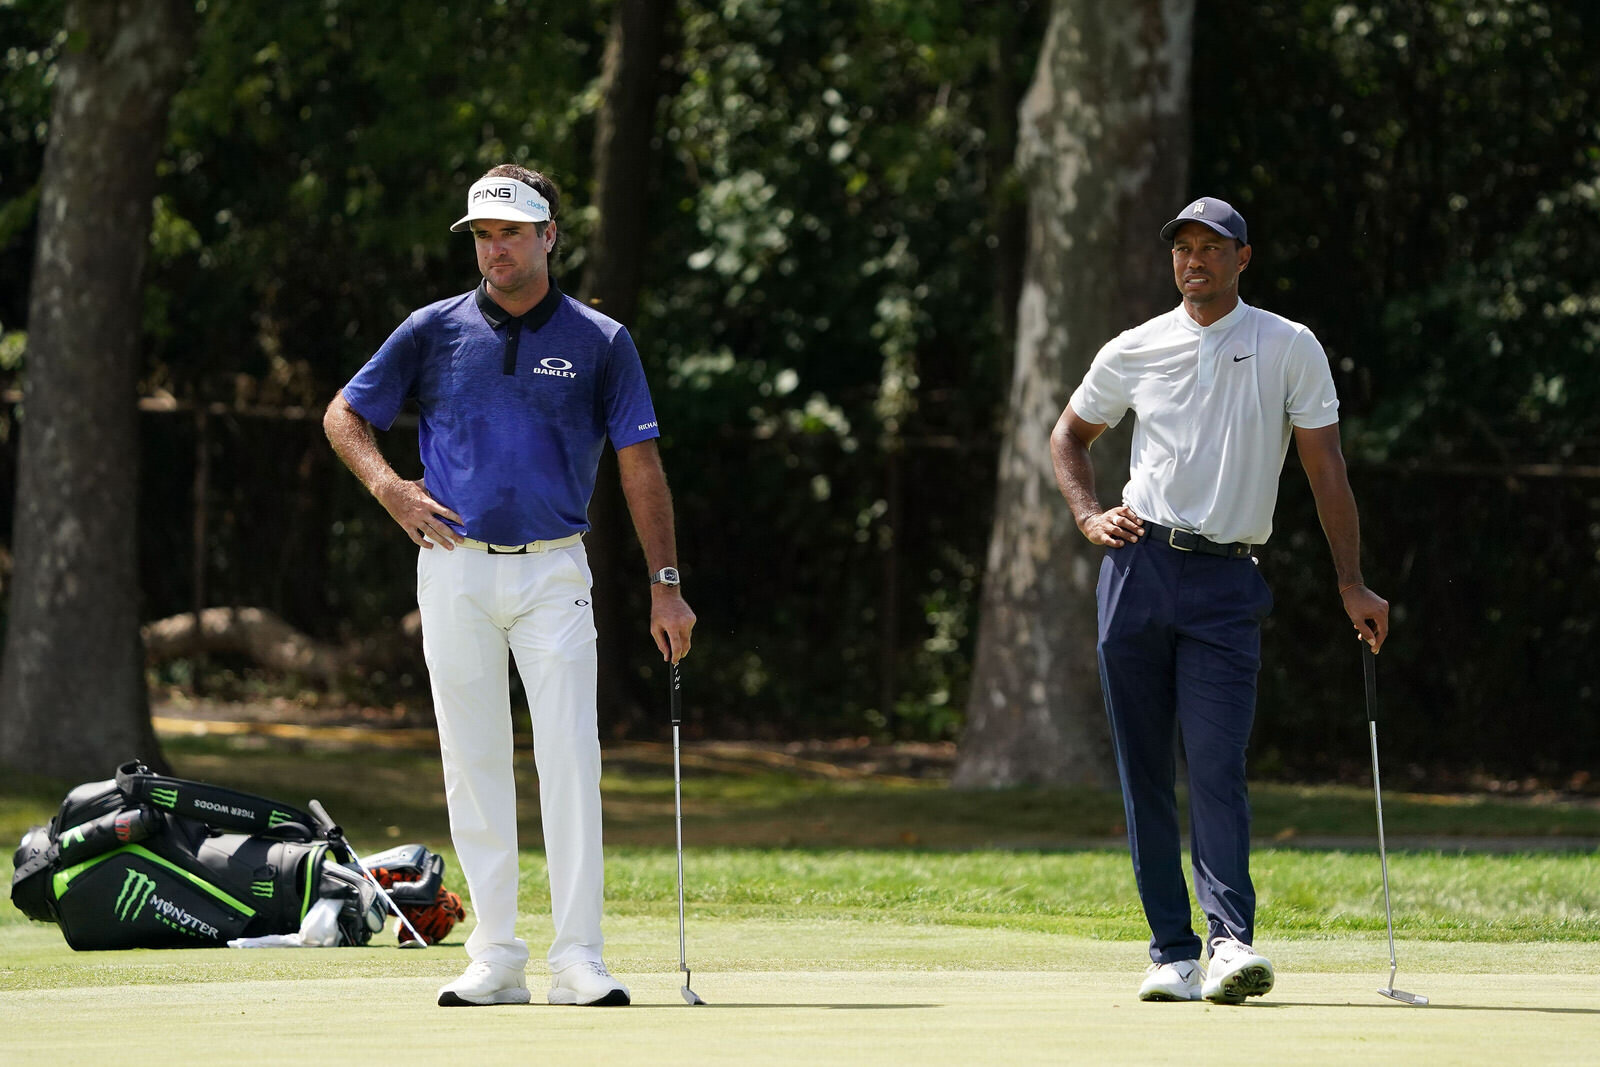  OLYMPIA FIELDS, ILLINOIS - AUGUST 28: (L-R) Bubba Watson of the United States and Tiger Woods of the United States wait on the first green during the second round of the BMW Championship on the North Course at Olympia Fields Country Club on August 2